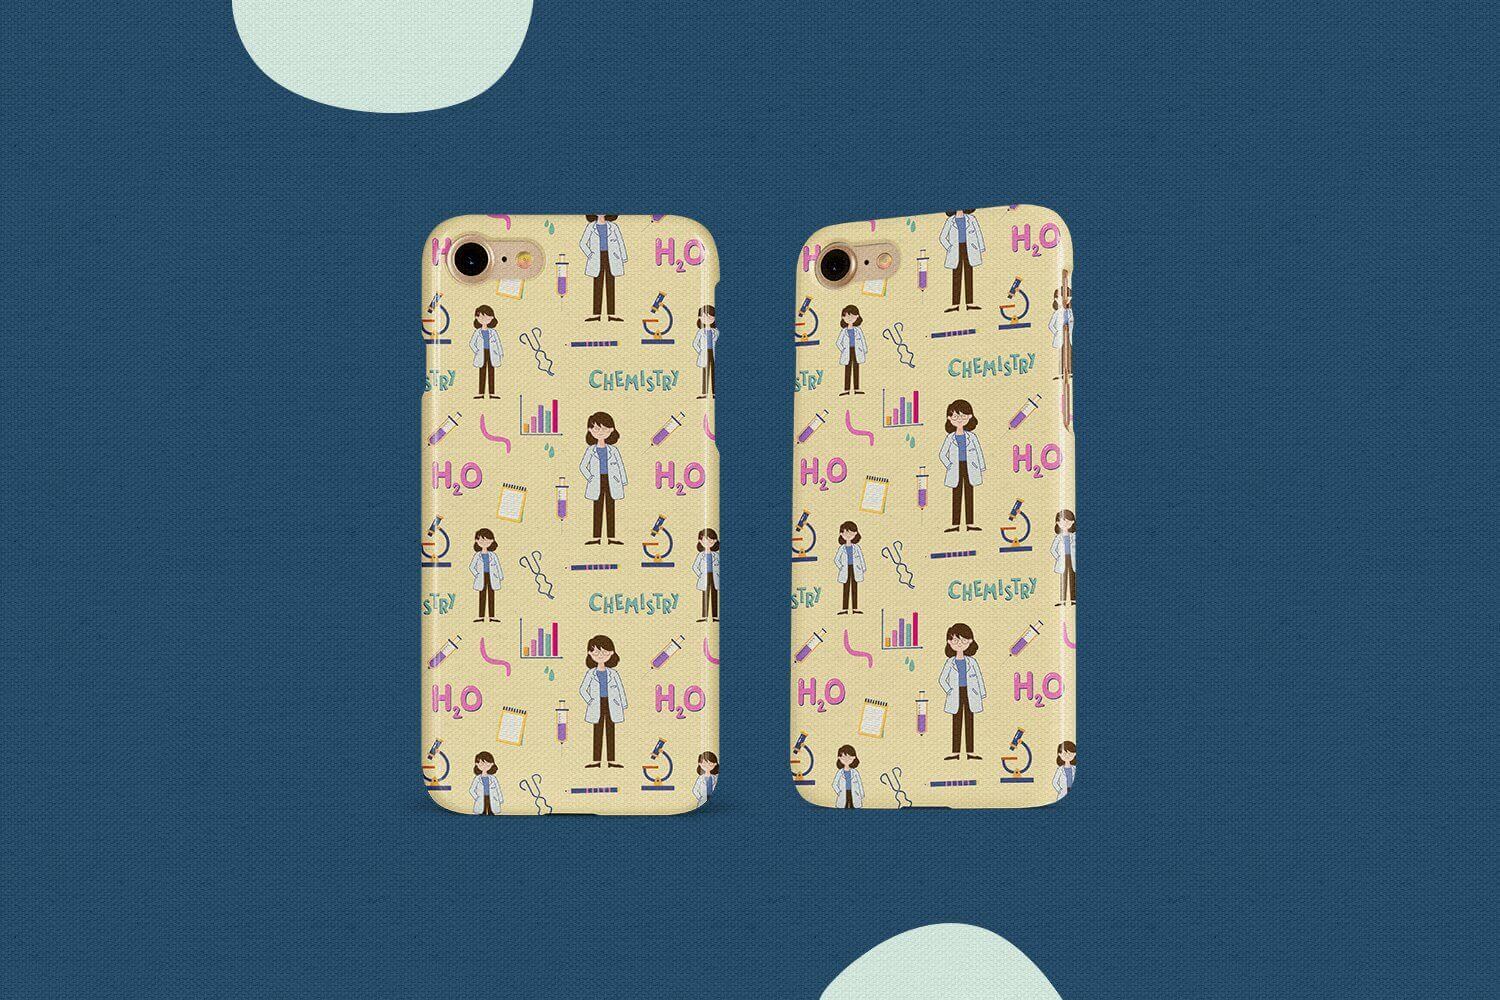 Bumpers for phones with a chemical theme.